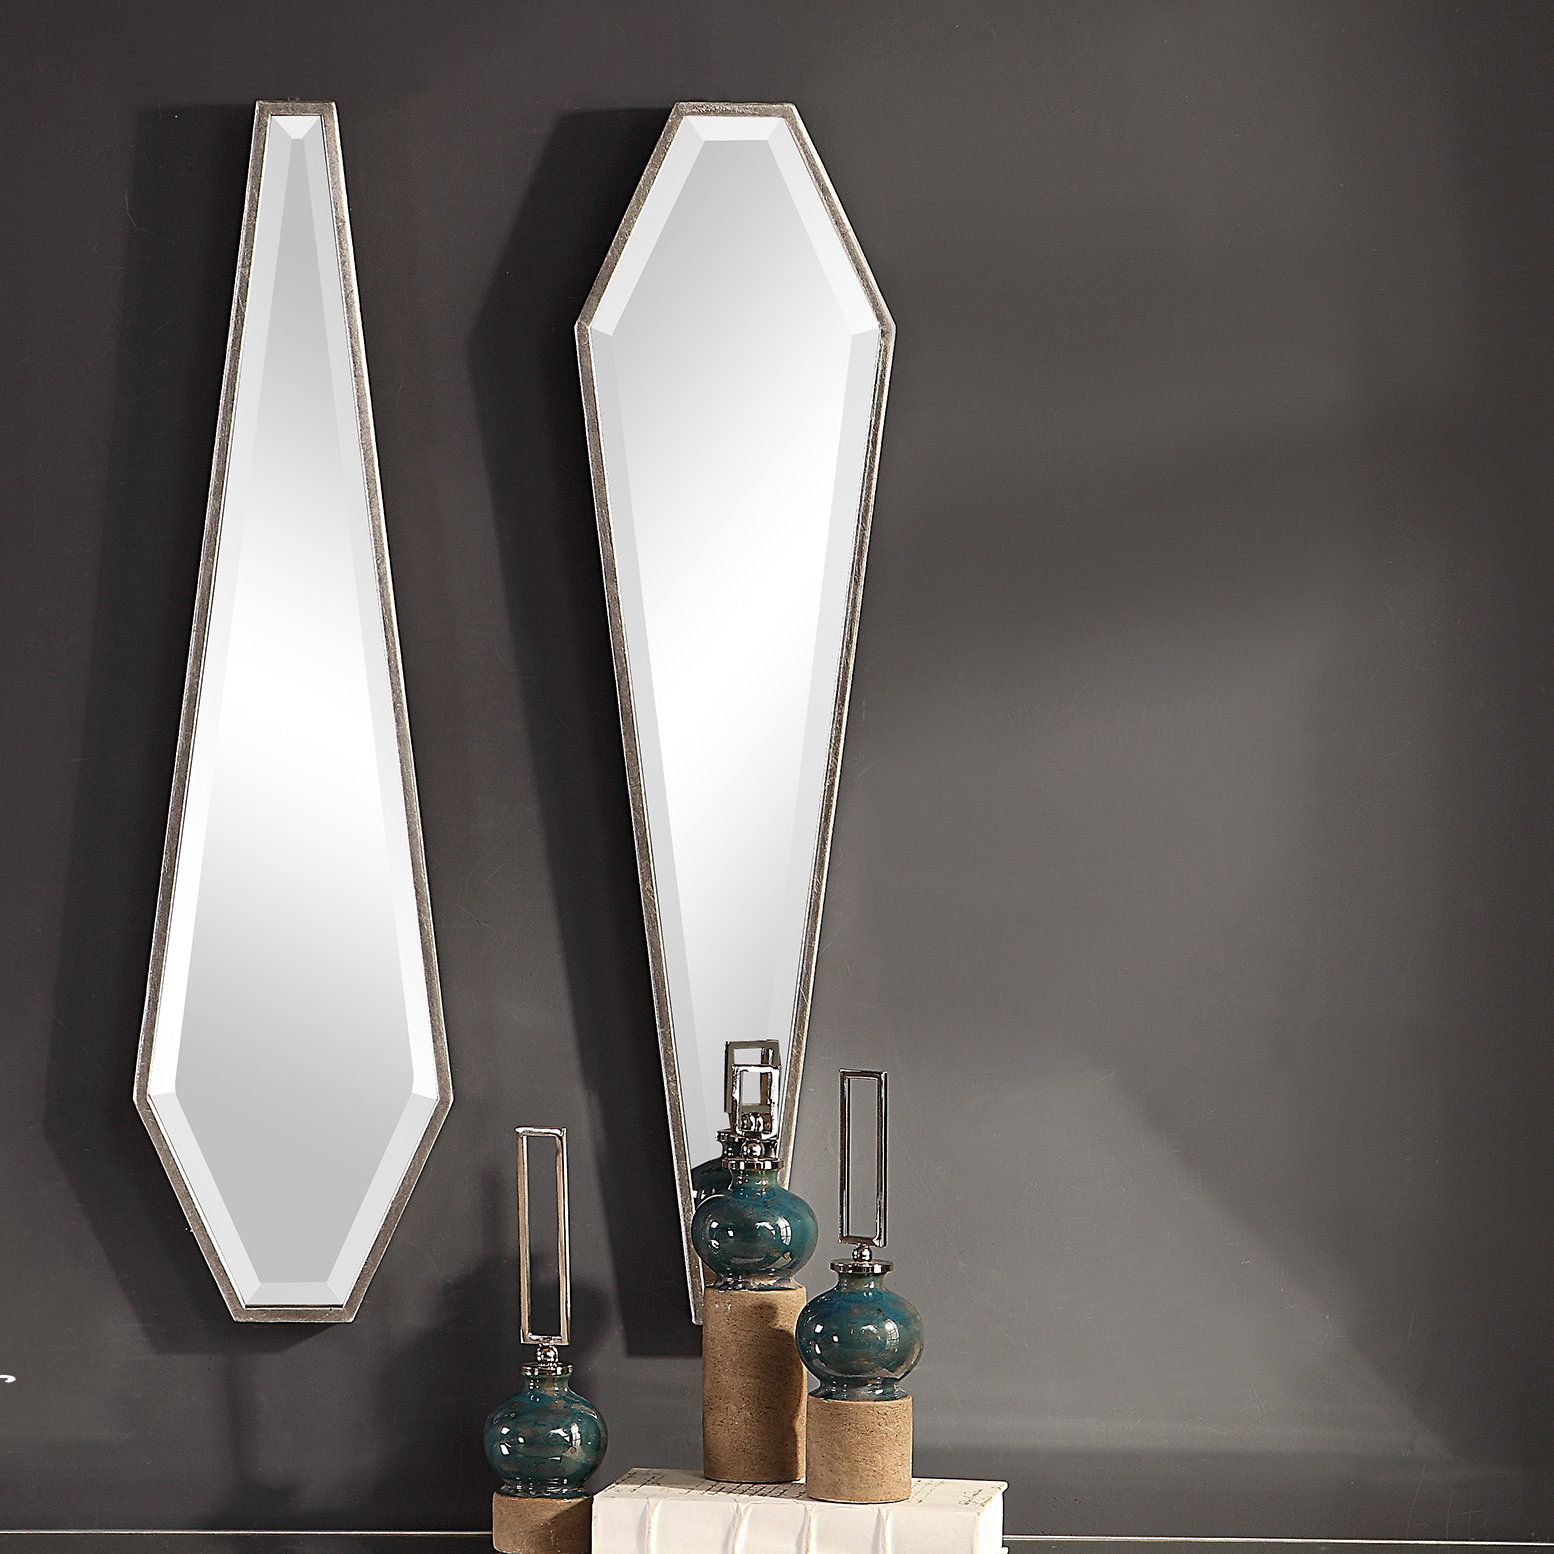 2 Piece Mirror Set | Wayfair With 3 Piece Dima Hanging Modern &amp; Contemporary Mirror Sets (View 3 of 20)